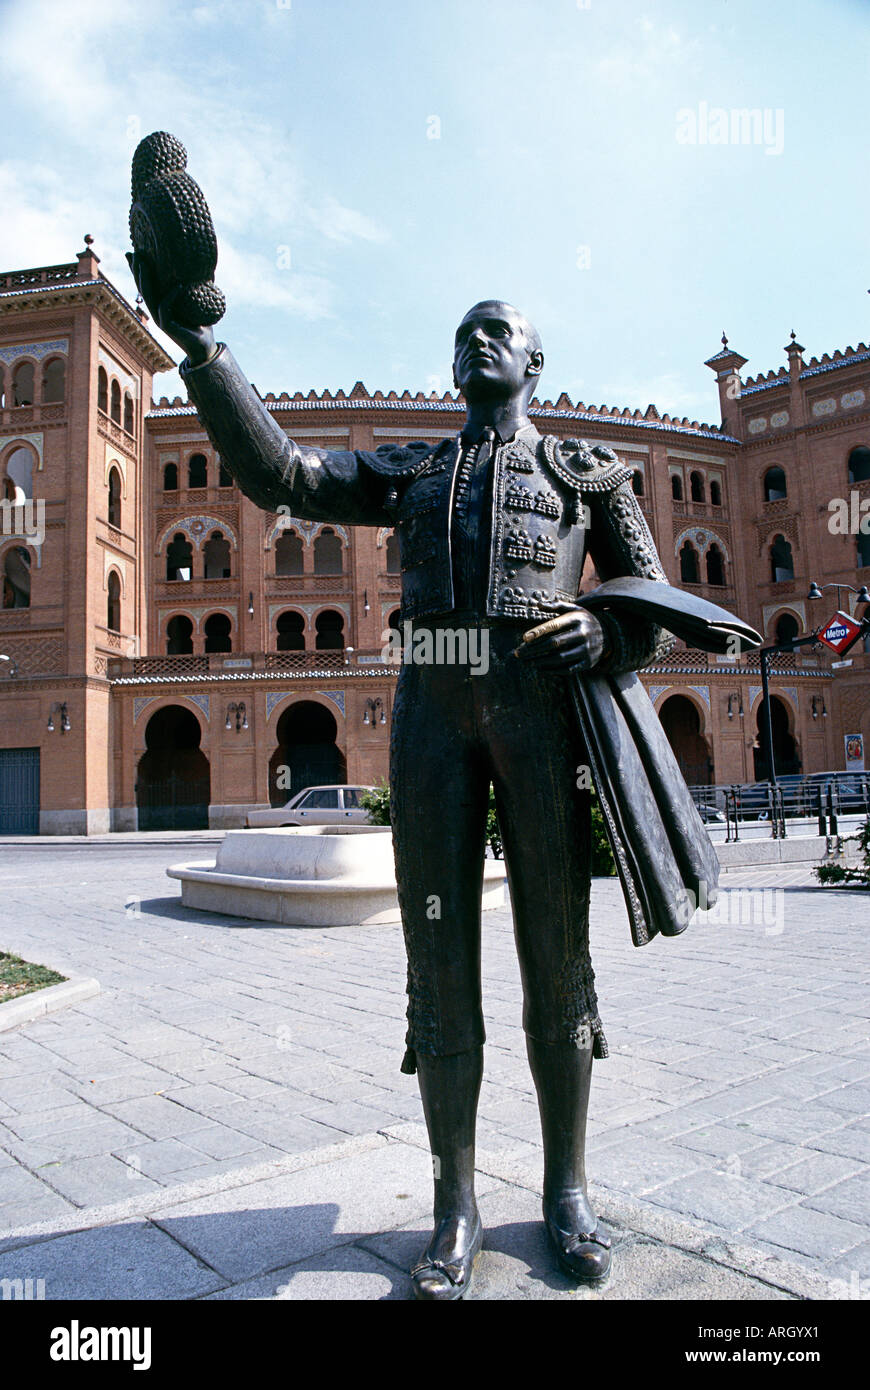 A bronze statue of a bull fighter with hat in hand and cloak draped over his arm situated in Madrid s Calle de Alcala with the facade and towers of a building in the background Stock Photo